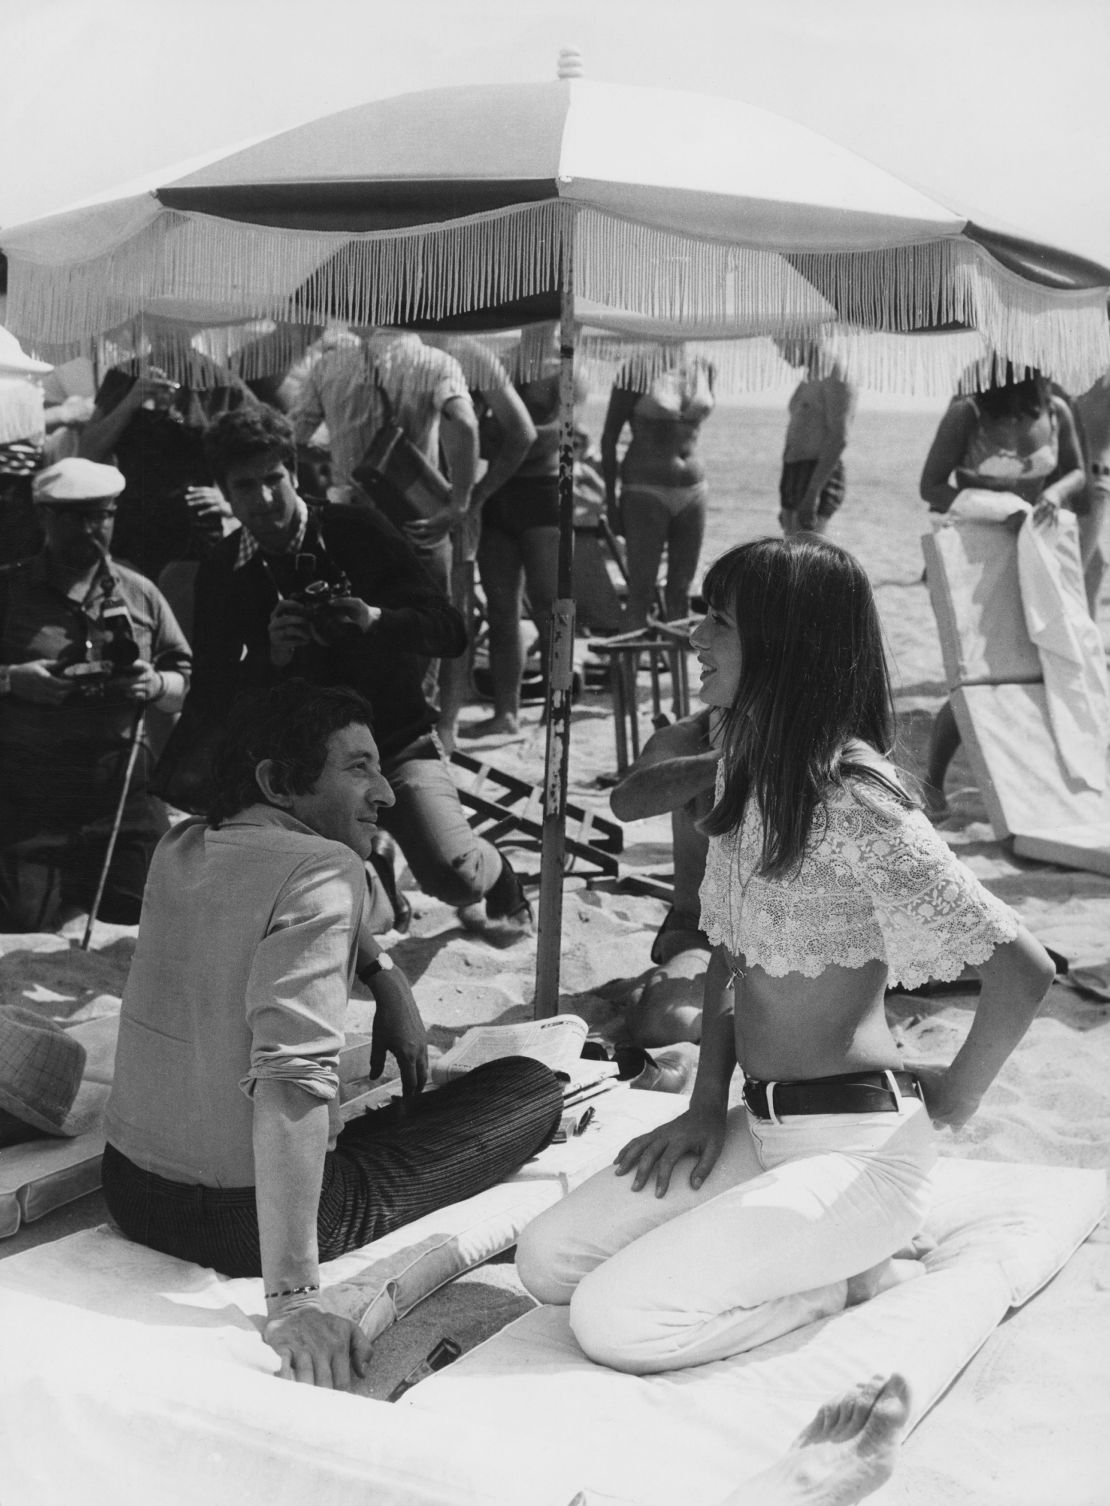 Away from the hustle and bustle of the red carpet Jane Birkin relaxes on the beach with her lover, French singer-songwriter Serge Gainsbourg. 